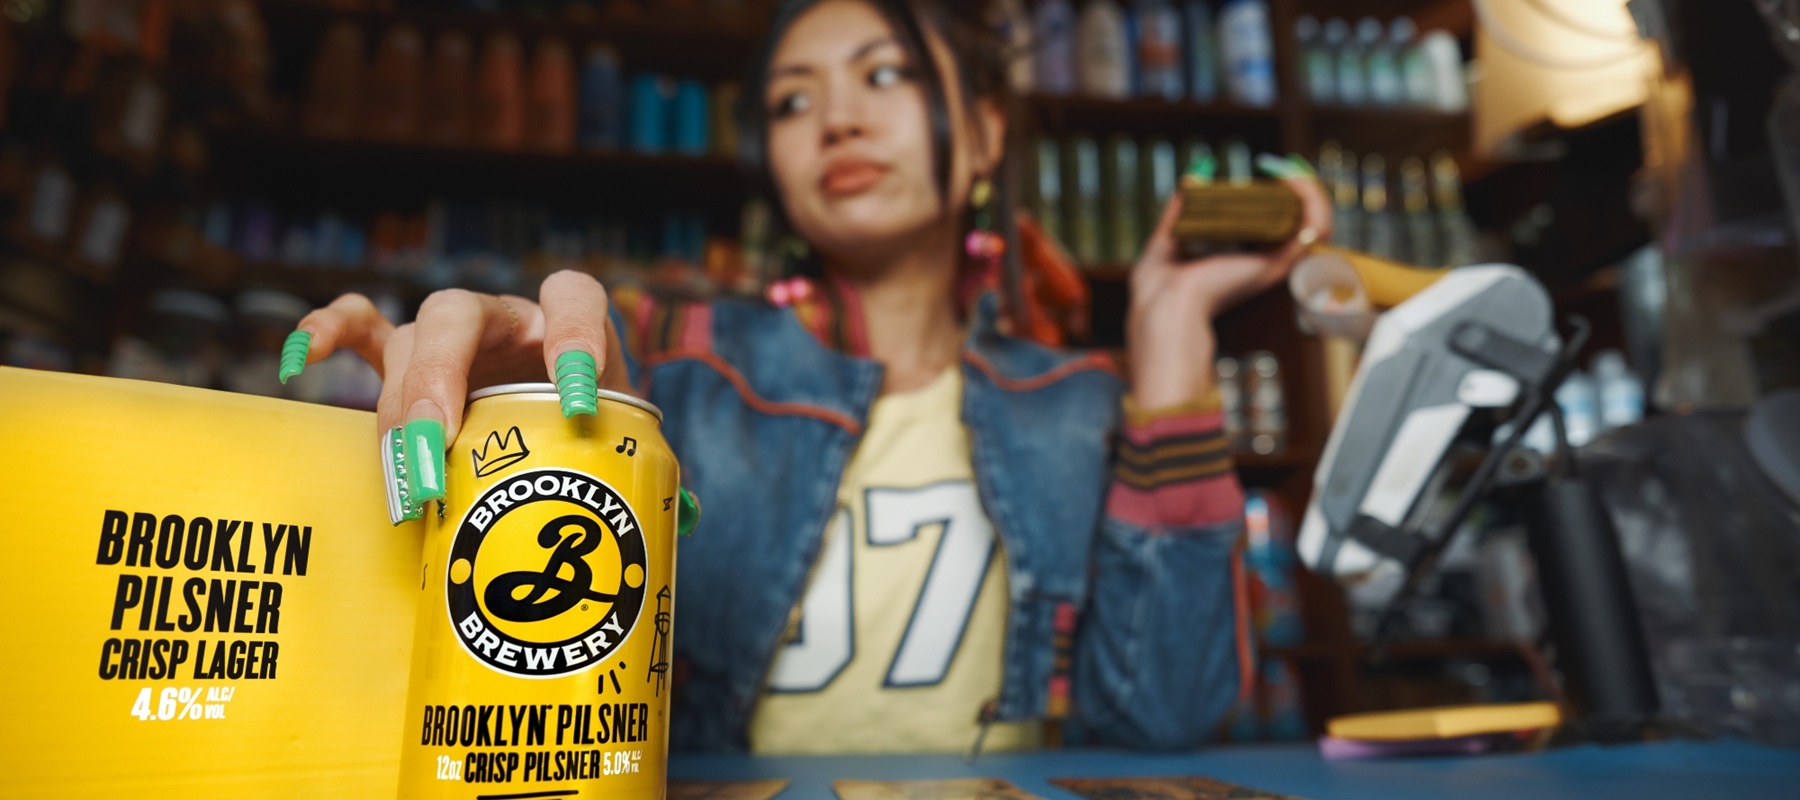 Brooklyn Brewery and film director Spike Lee collaborate to create global campaign